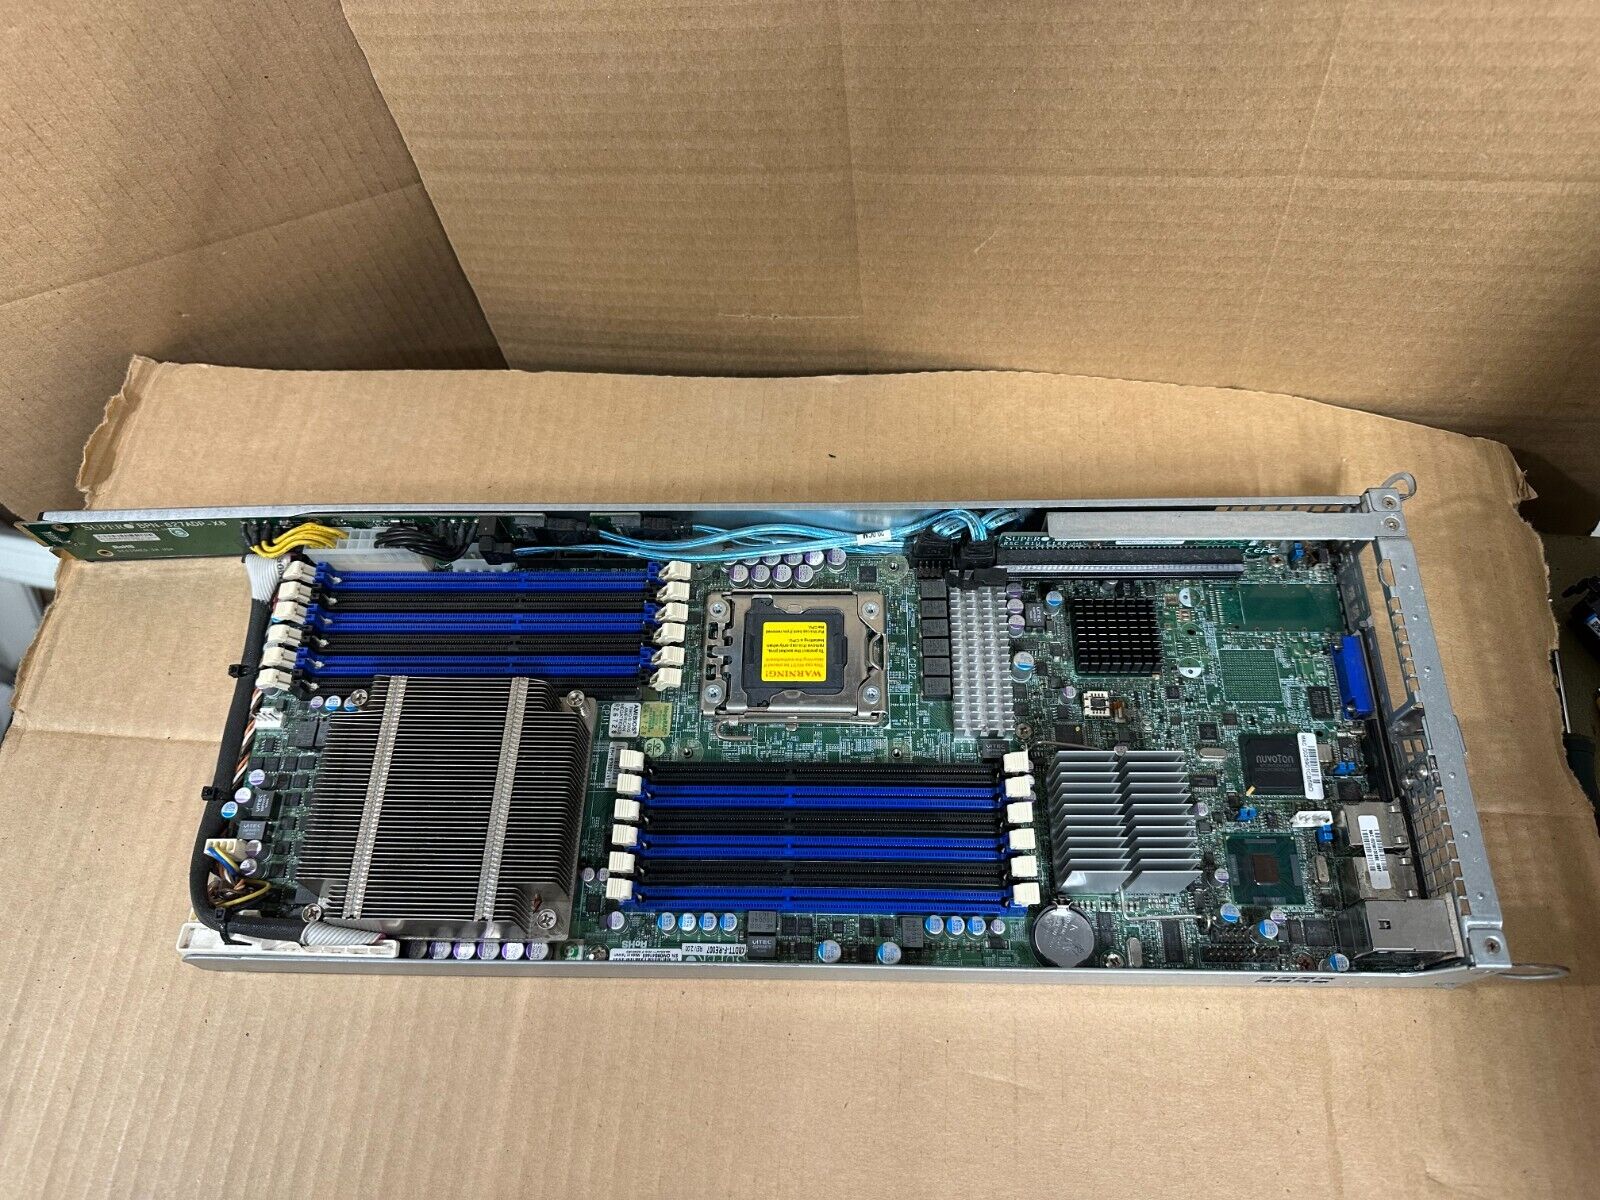 Amibios 786Q 2000 American Megatrends Motherboard and Supermicro BPN-827ADP-X8